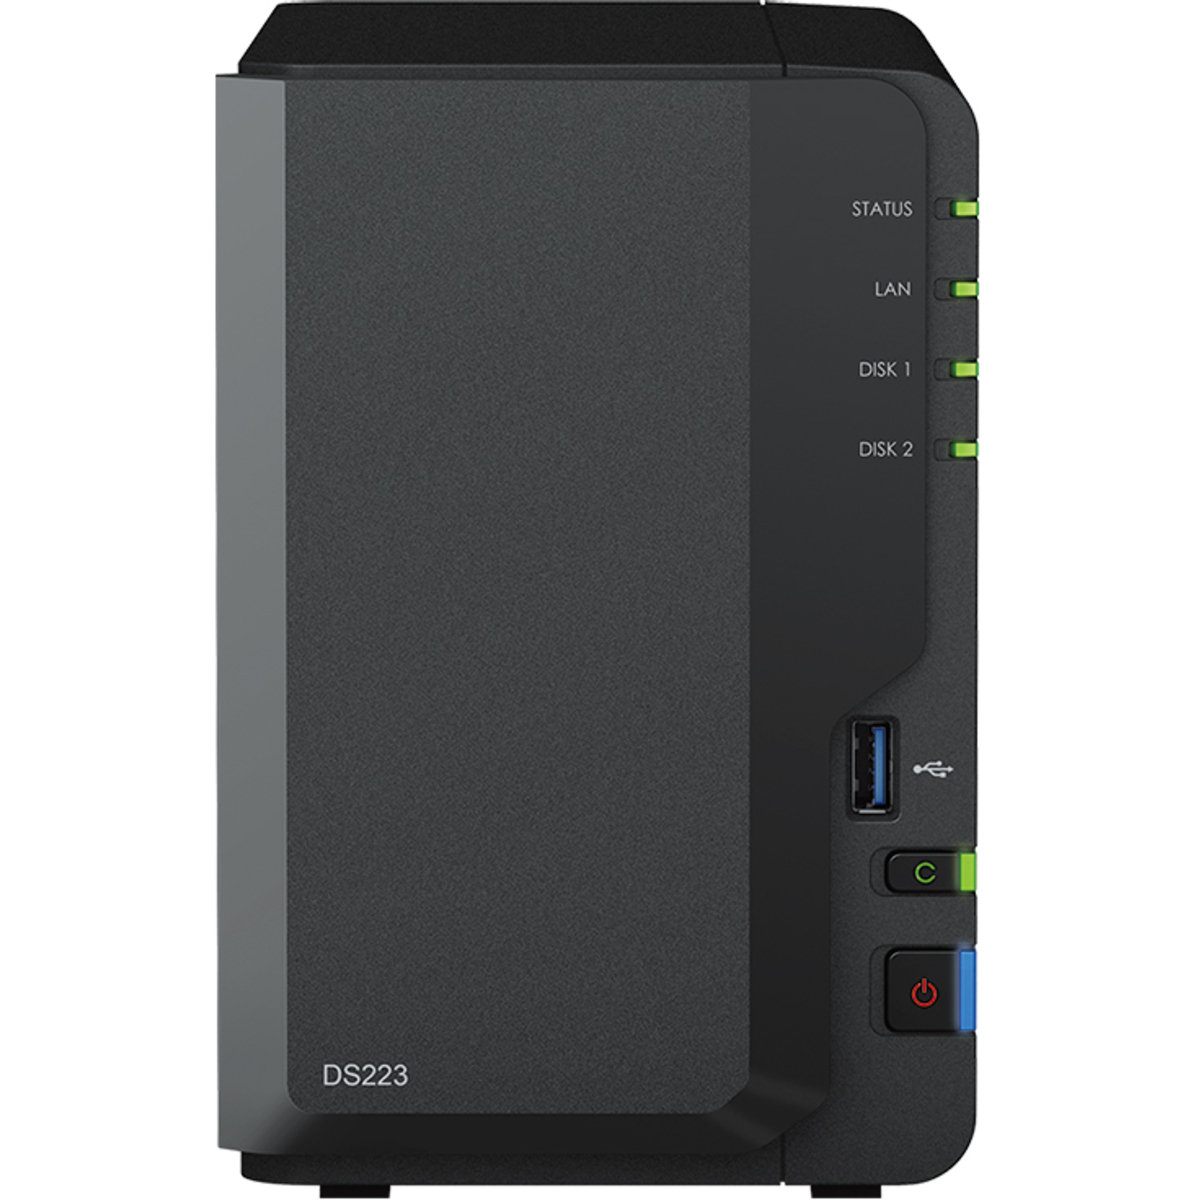 buy Synology DiskStation DS223 44tb Desktop NAS - Network Attached Storage Device 2x22000gb Western Digital Red Pro WD221KFGX 3.5 7200rpm SATA 6Gb/s HDD NAS Class Drives Installed - Burn-In Tested - nas headquarters buy network attached storage server device das new raid-5 free shipping simply usa DiskStation DS223